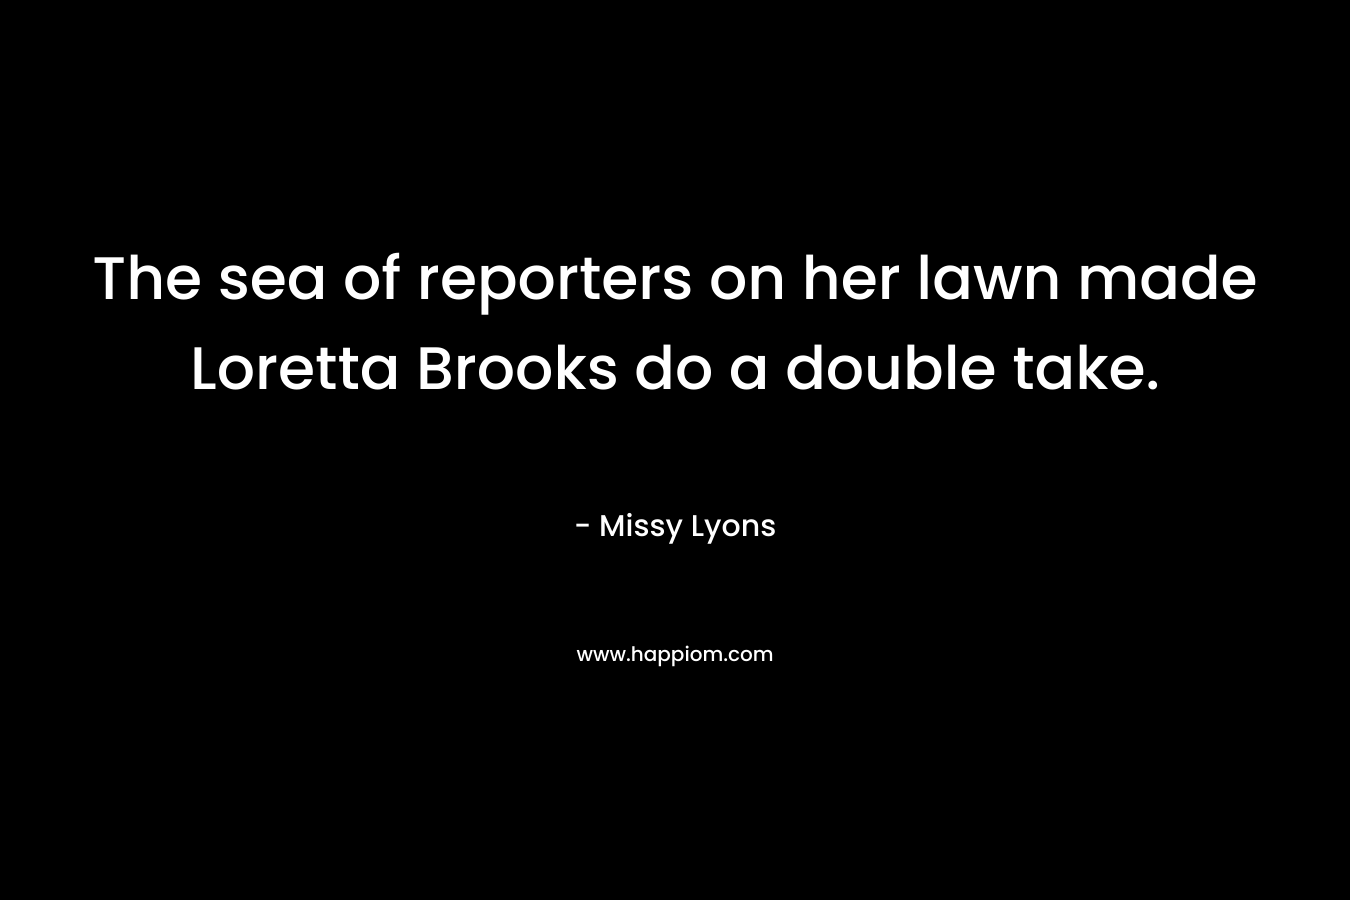 The sea of reporters on her lawn made Loretta Brooks do a double take. – Missy Lyons